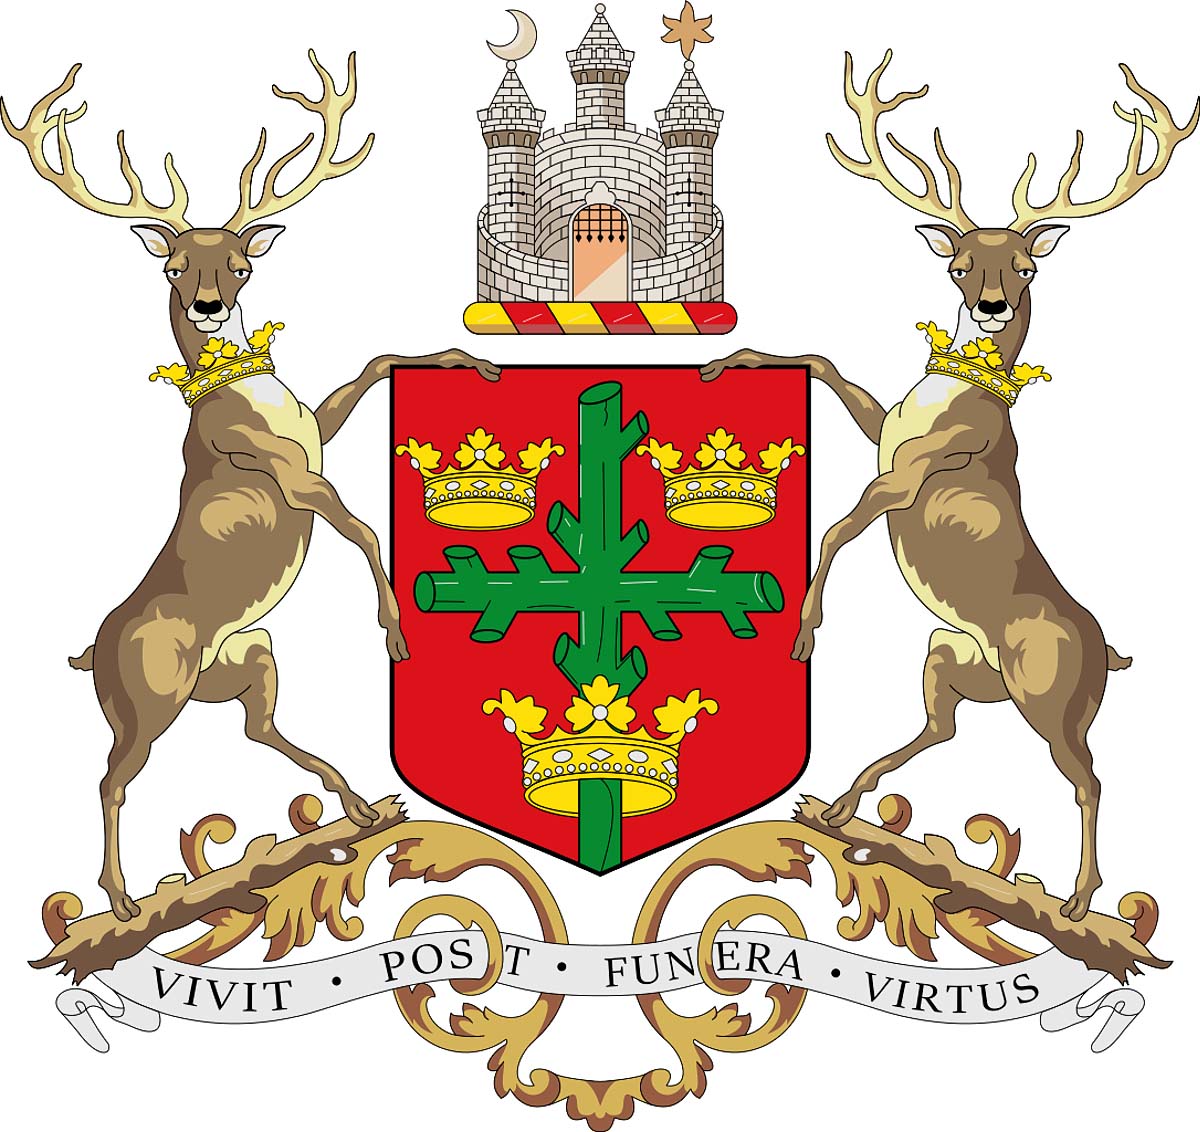 Coat of arms of Nottingham